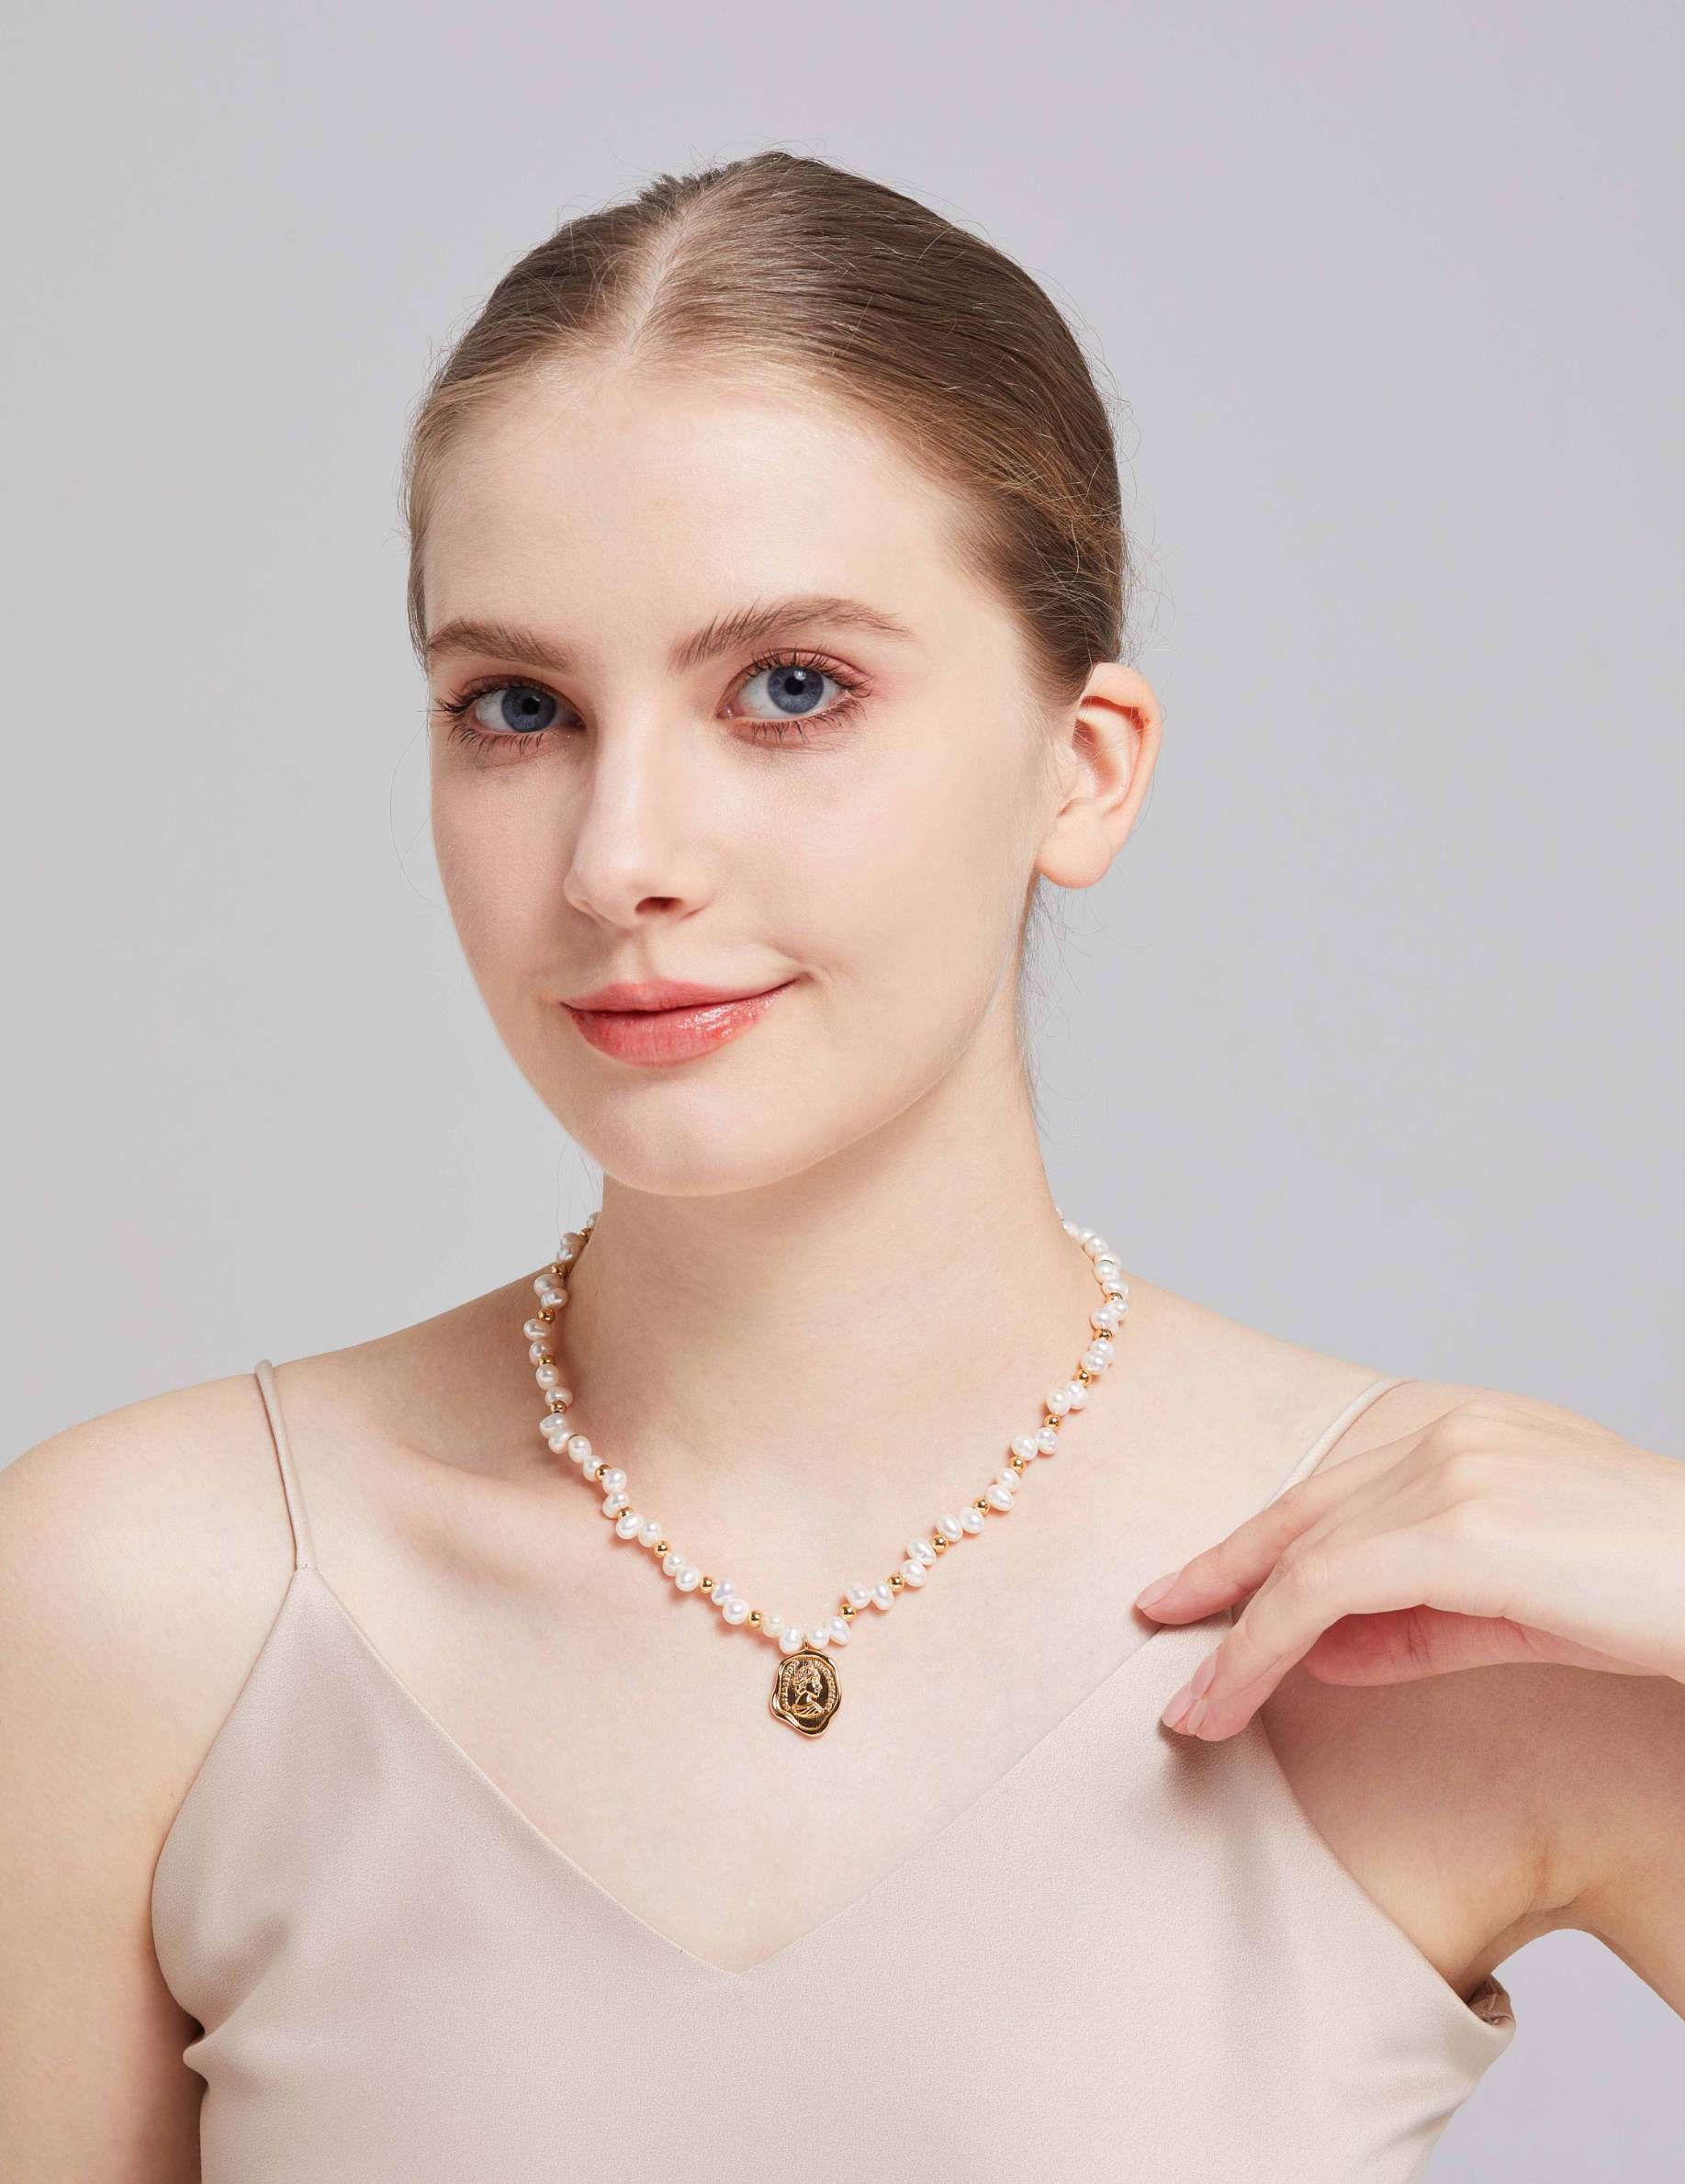 Stylish Female Model with Natural Pearl Jewelry